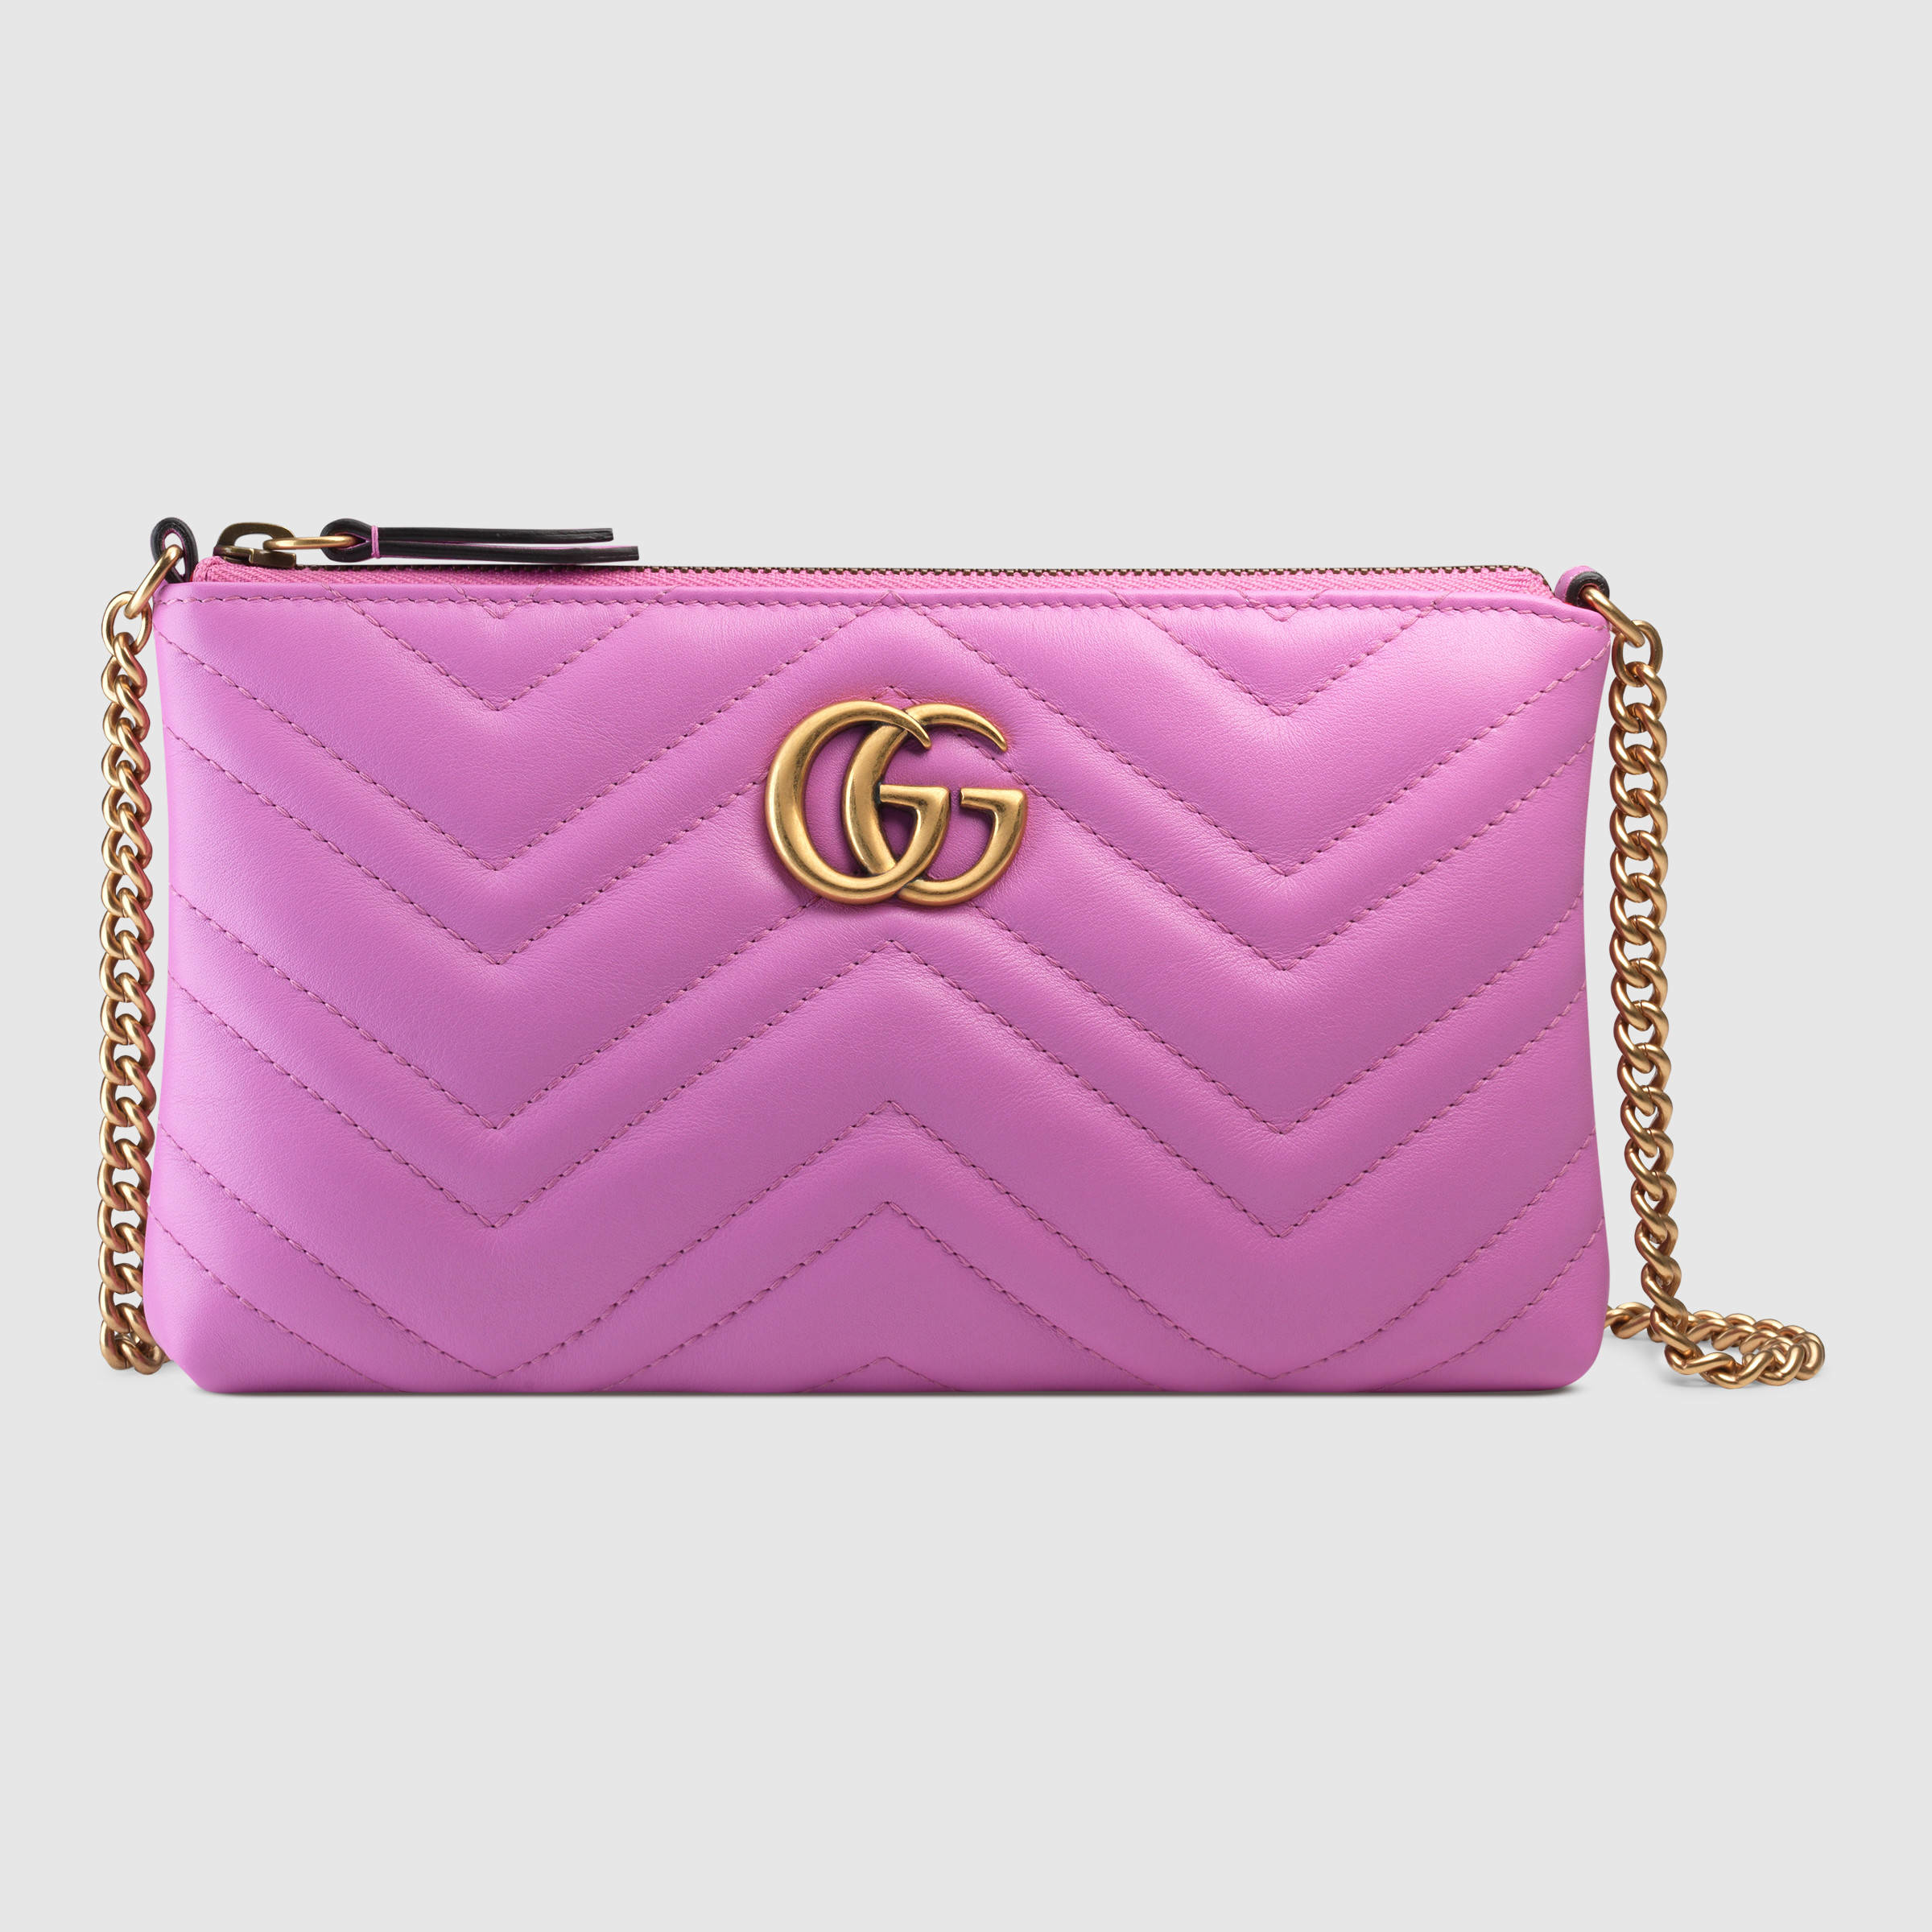 Lyst - Gucci GG Marmont Mini Leather Chain Bag in Pink